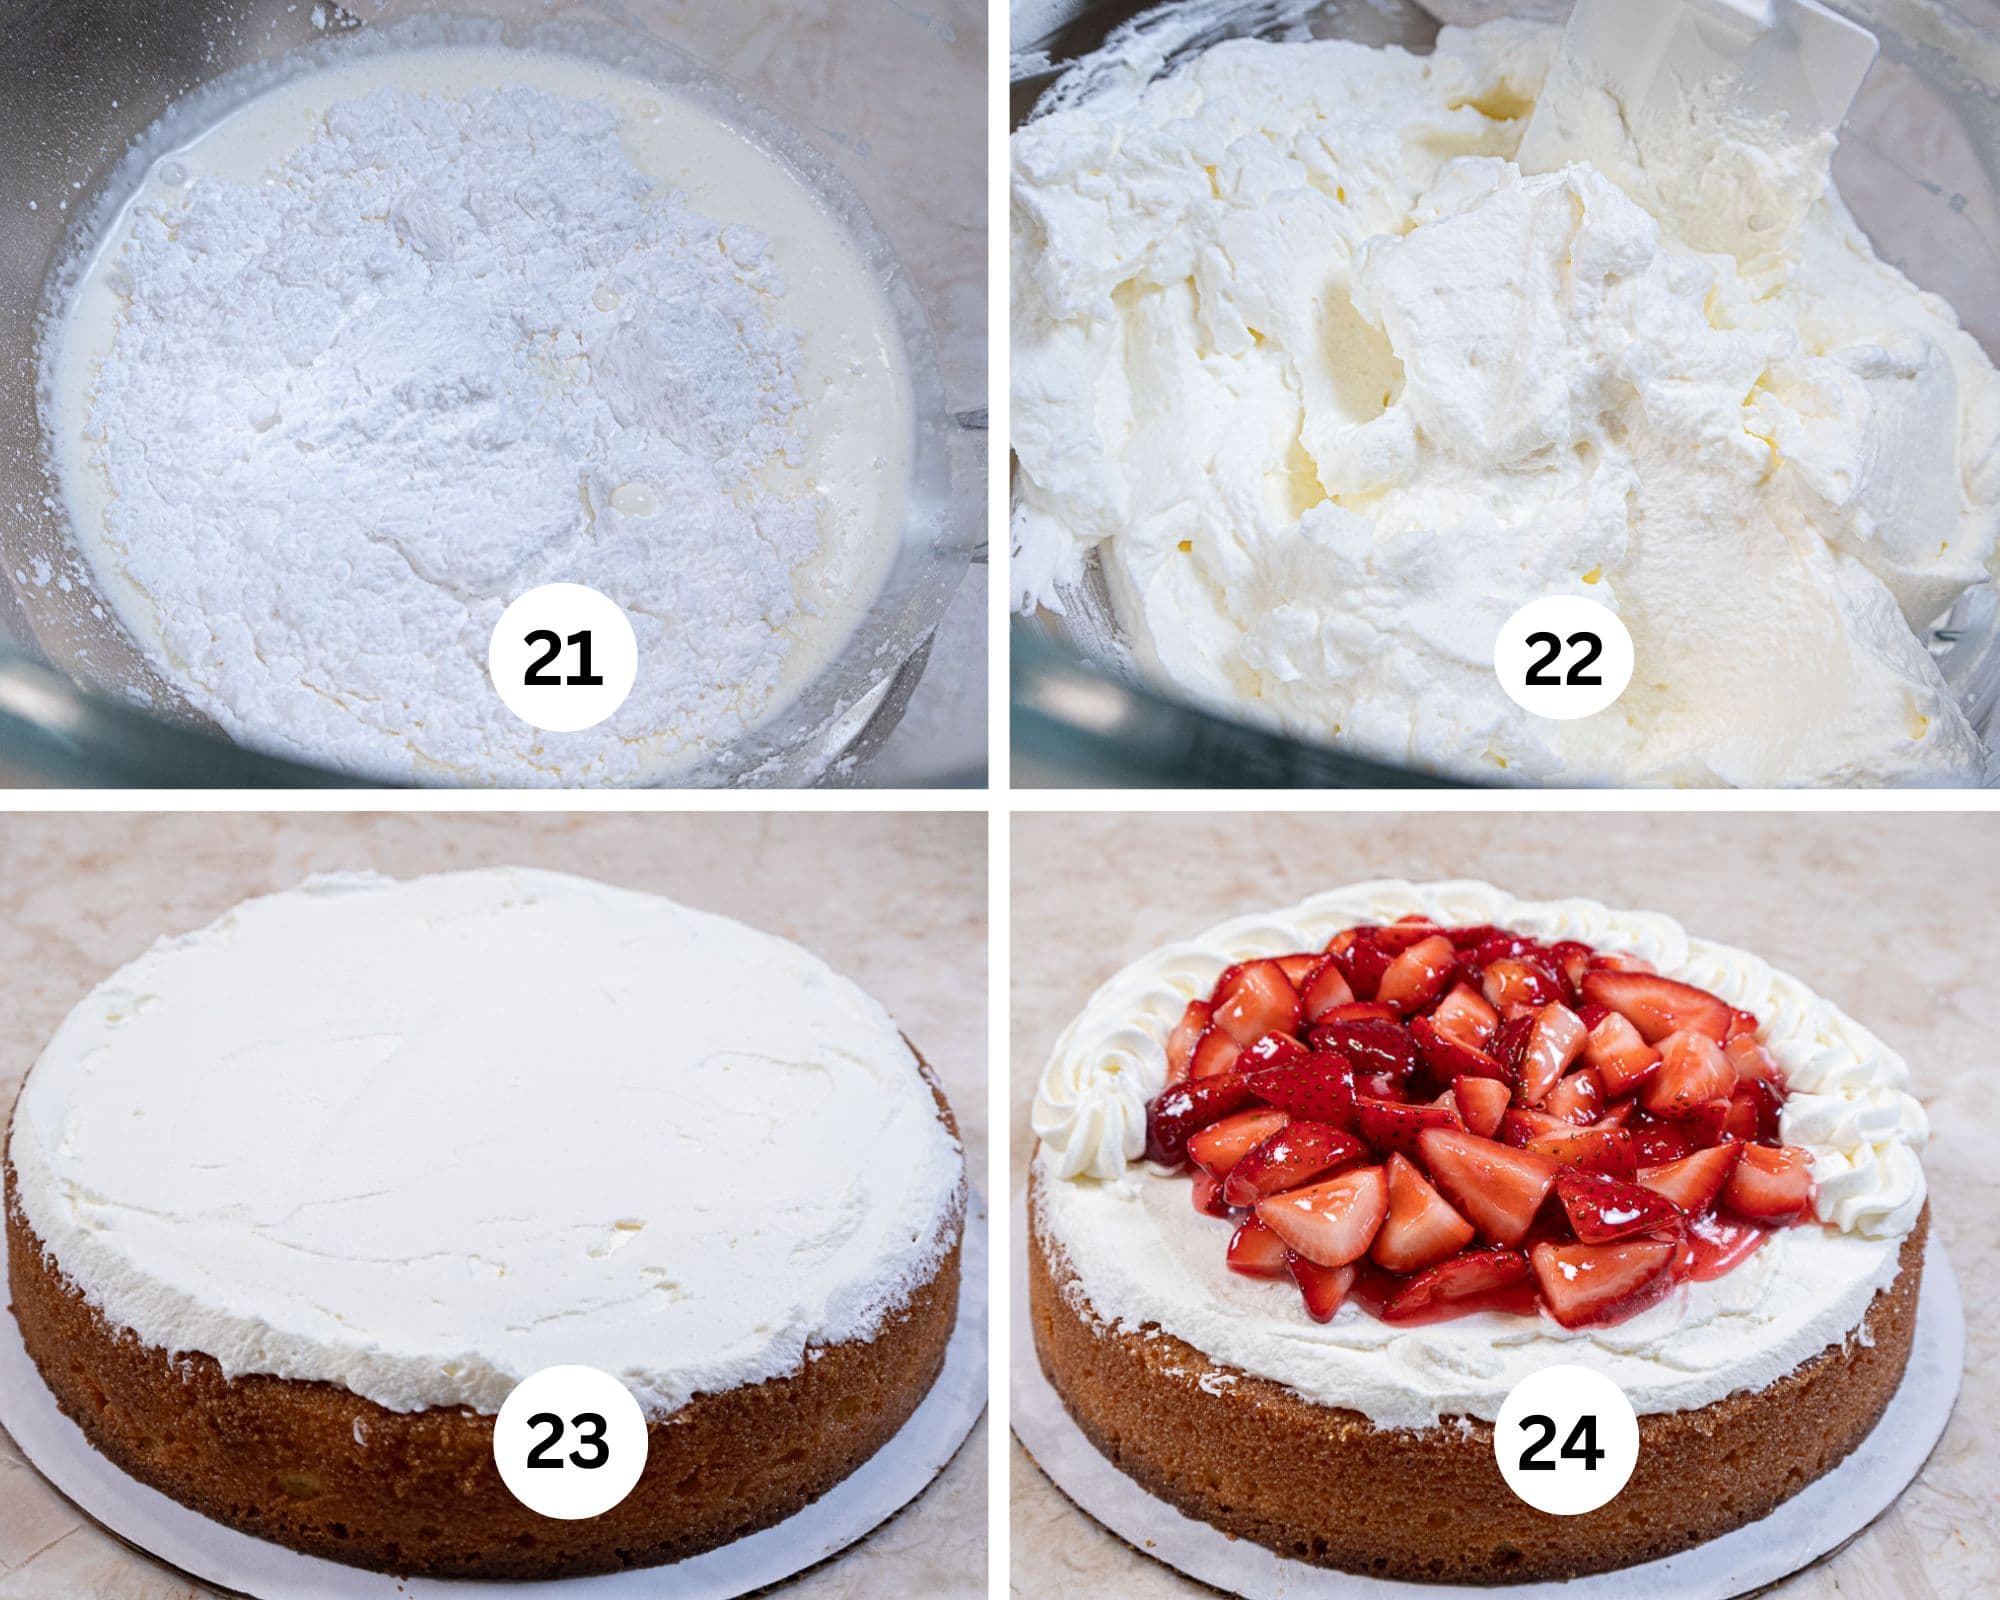 The last collage shows the cream and powdered sugar in a mixing bowl, it is whipped, spread on the cake and the cake is finished with the strawberries and  edged in whipped cream.